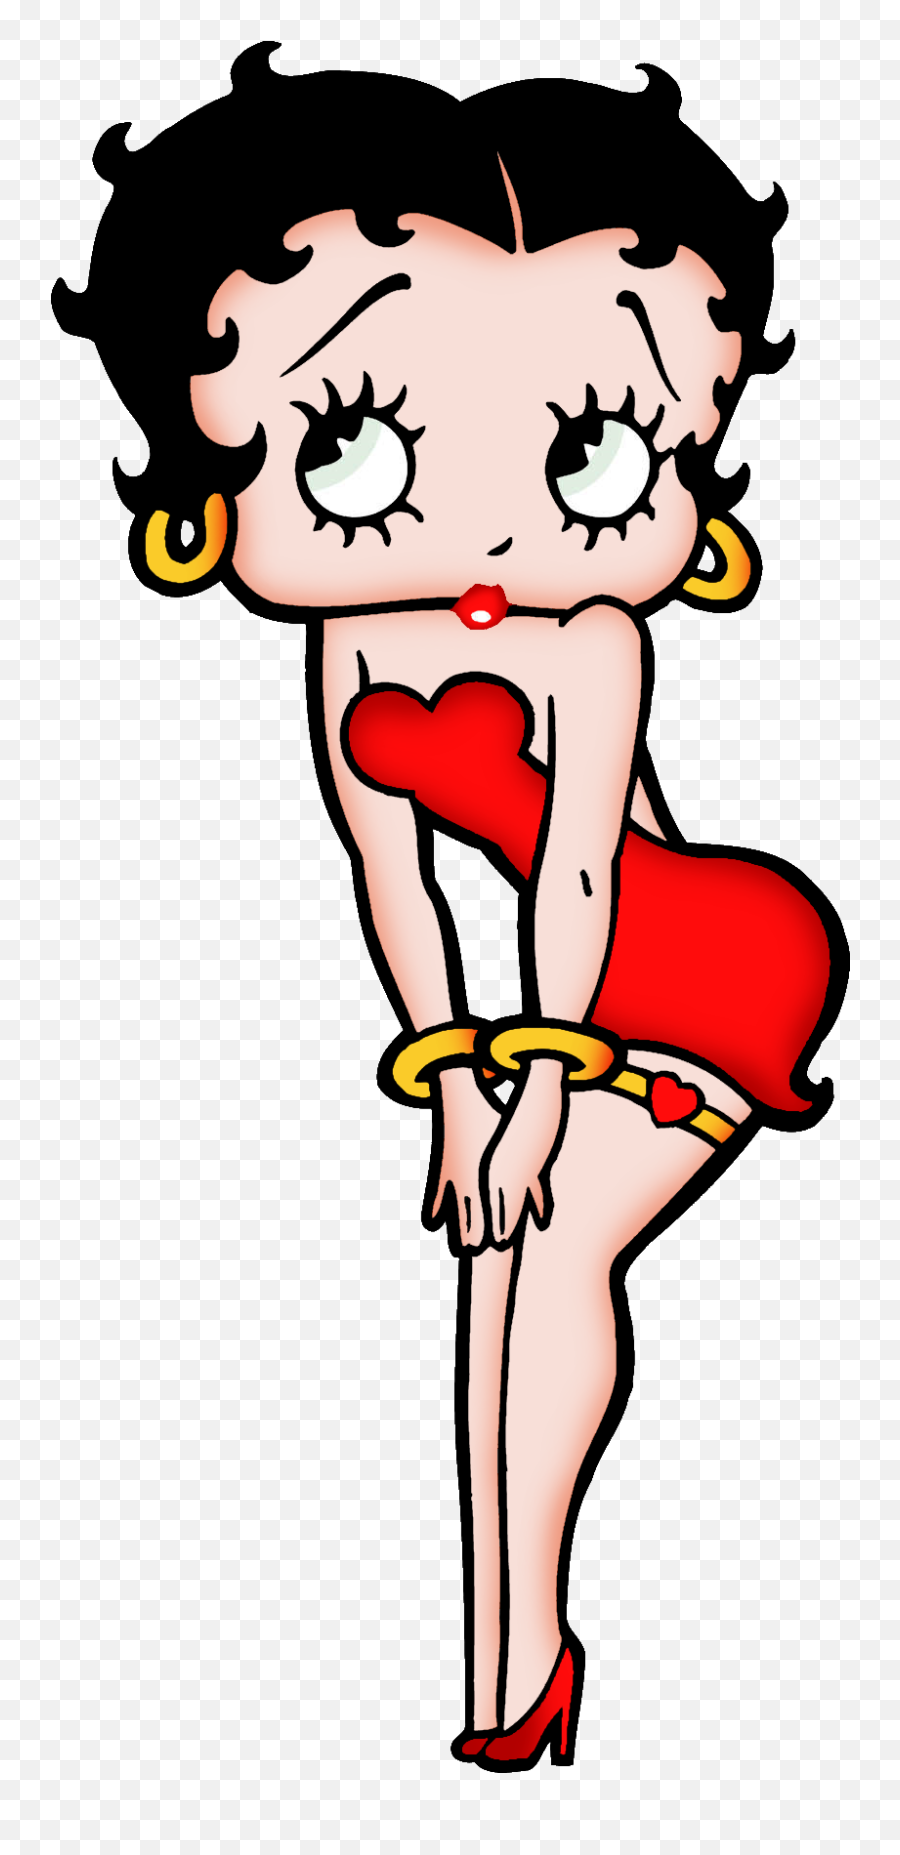 Betty Boop Png 7 Image - Betty Boop Cartoon Characters,Betty Boop Png